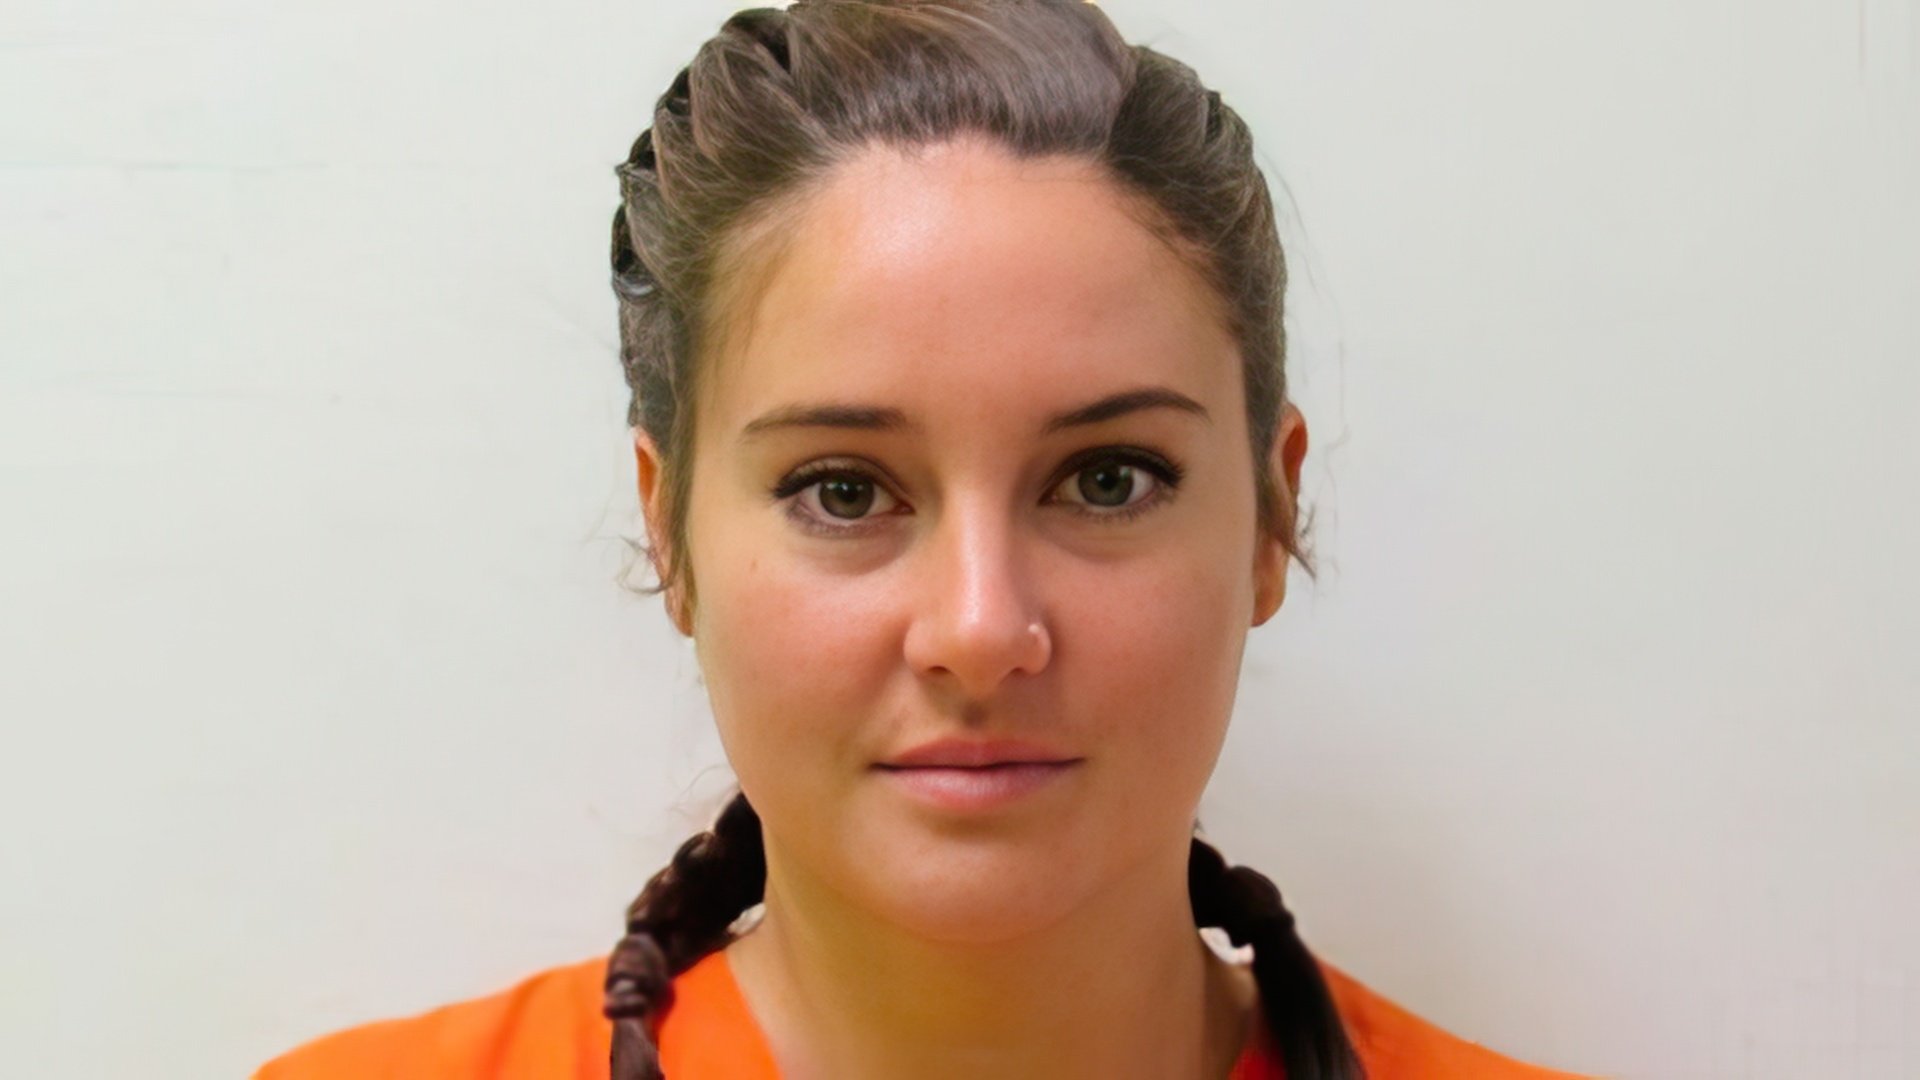 In 2016, Shailene Woodley was arrested for protest activities